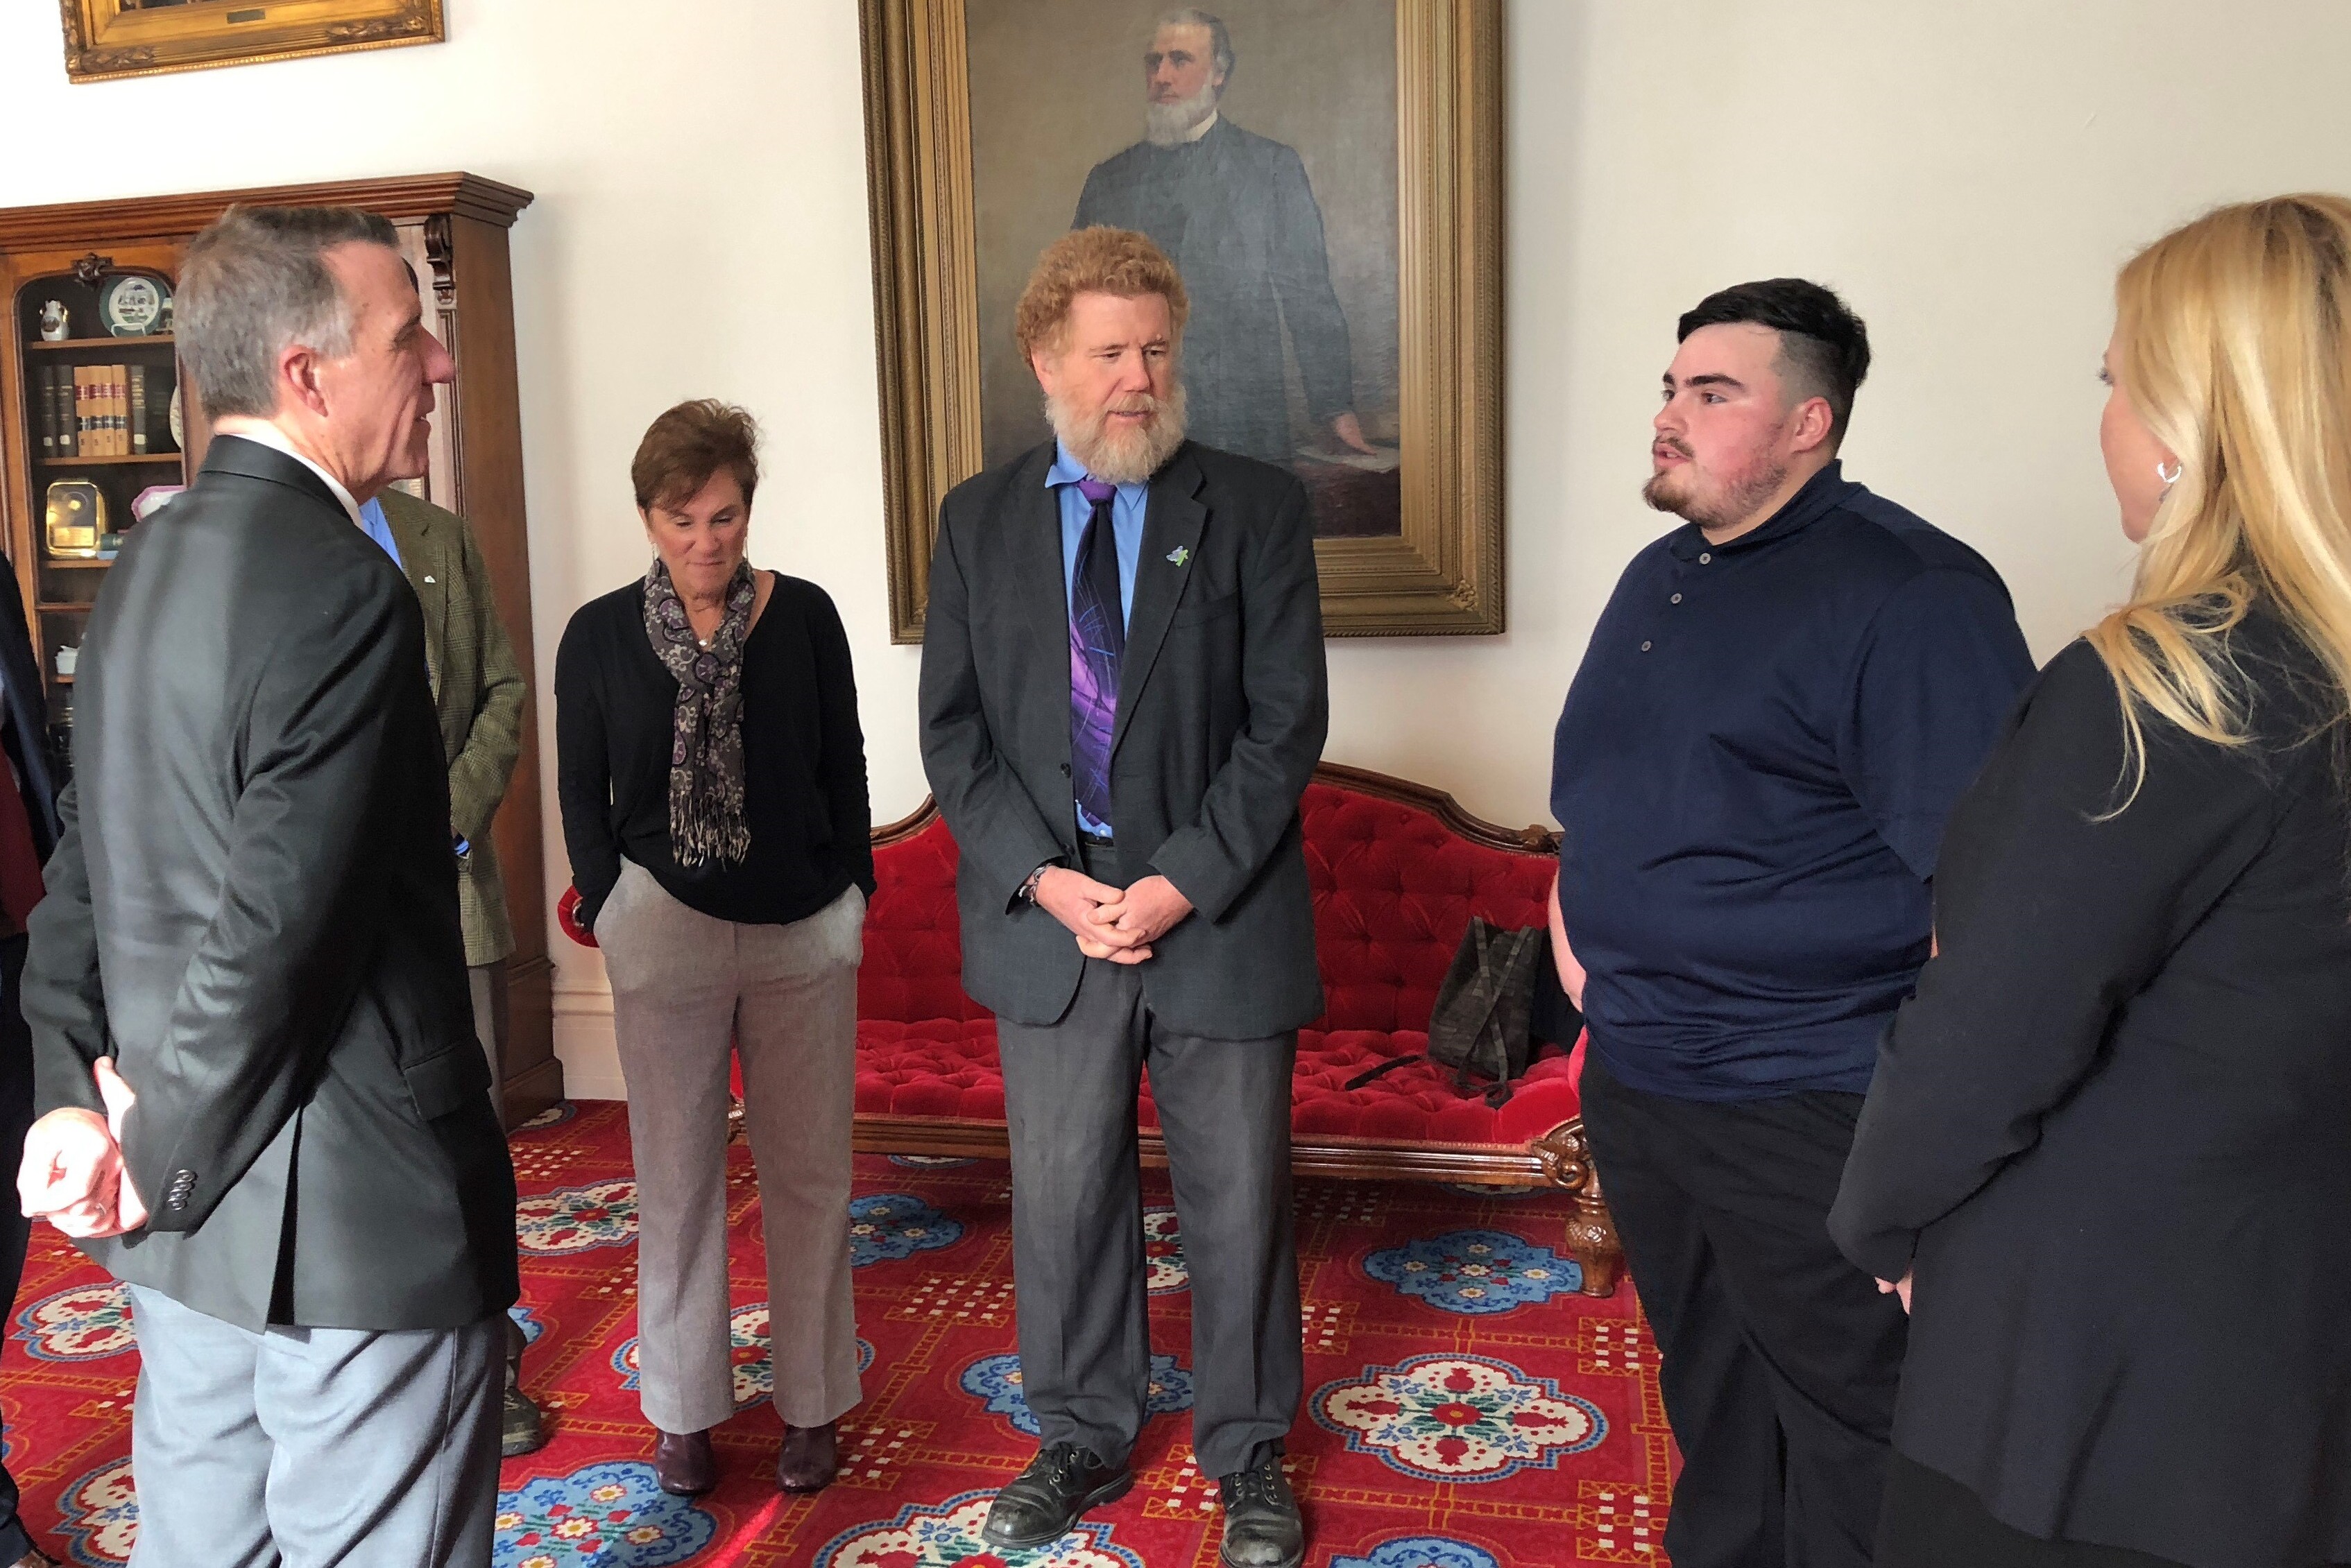 Chaice Lopez, Kids' Chance award recipient, converses with Governor Phil Scott during Kids' Chance Awareness Week in 2018. Board members Phyllis Phillips, Keith Kasper, and Heidi Groff look on.